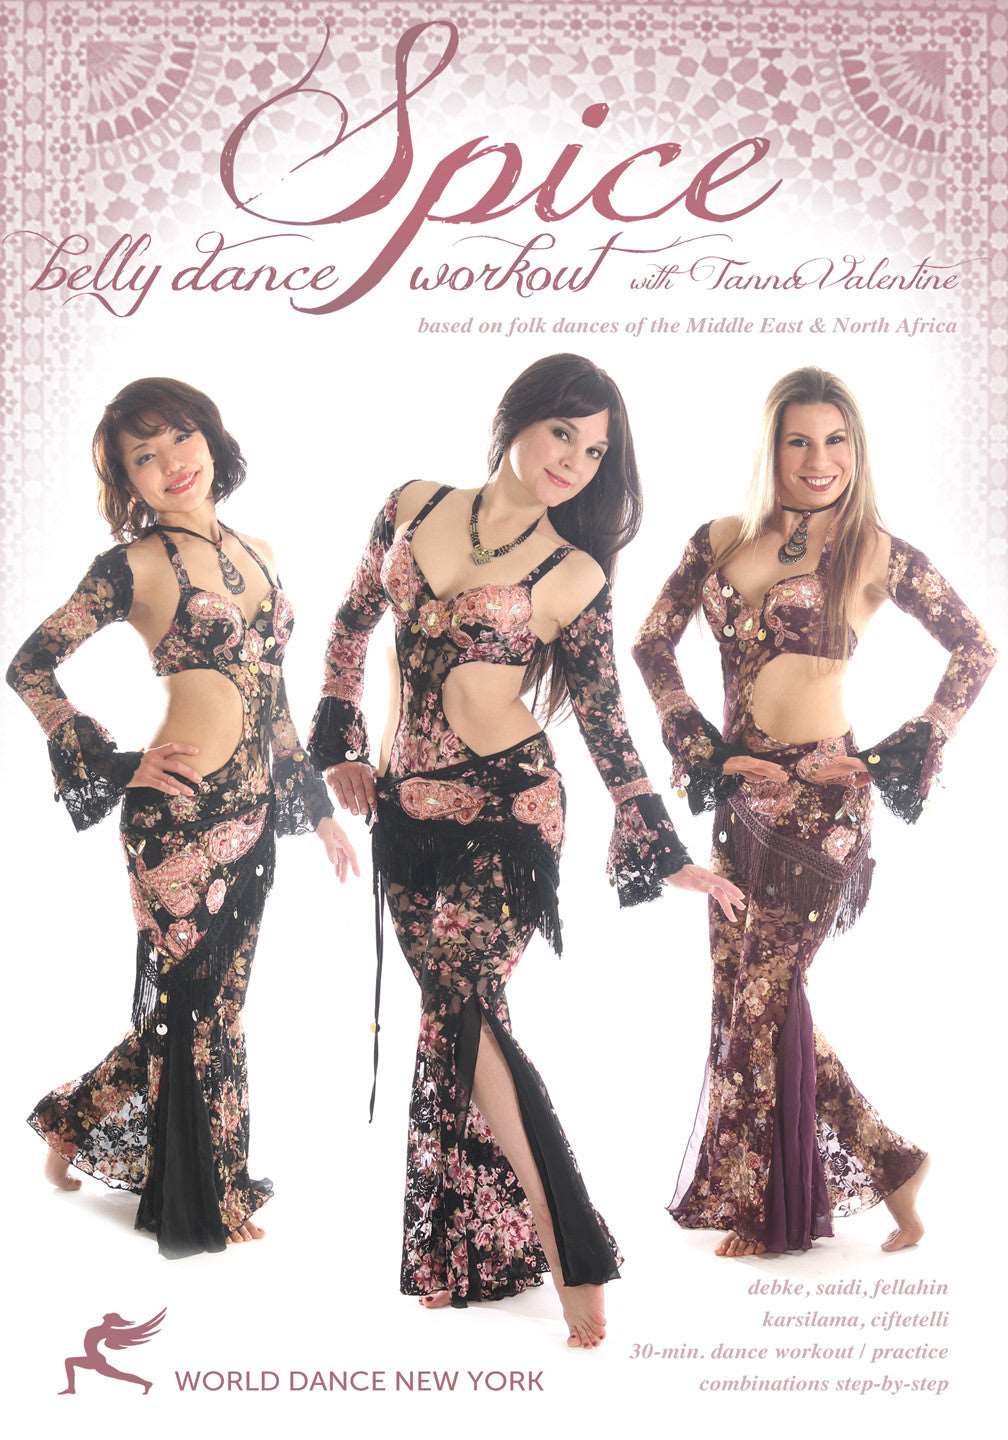 "Spice - The Belly Dance Workout" DVD with Tanna Valentine - World Dance New York